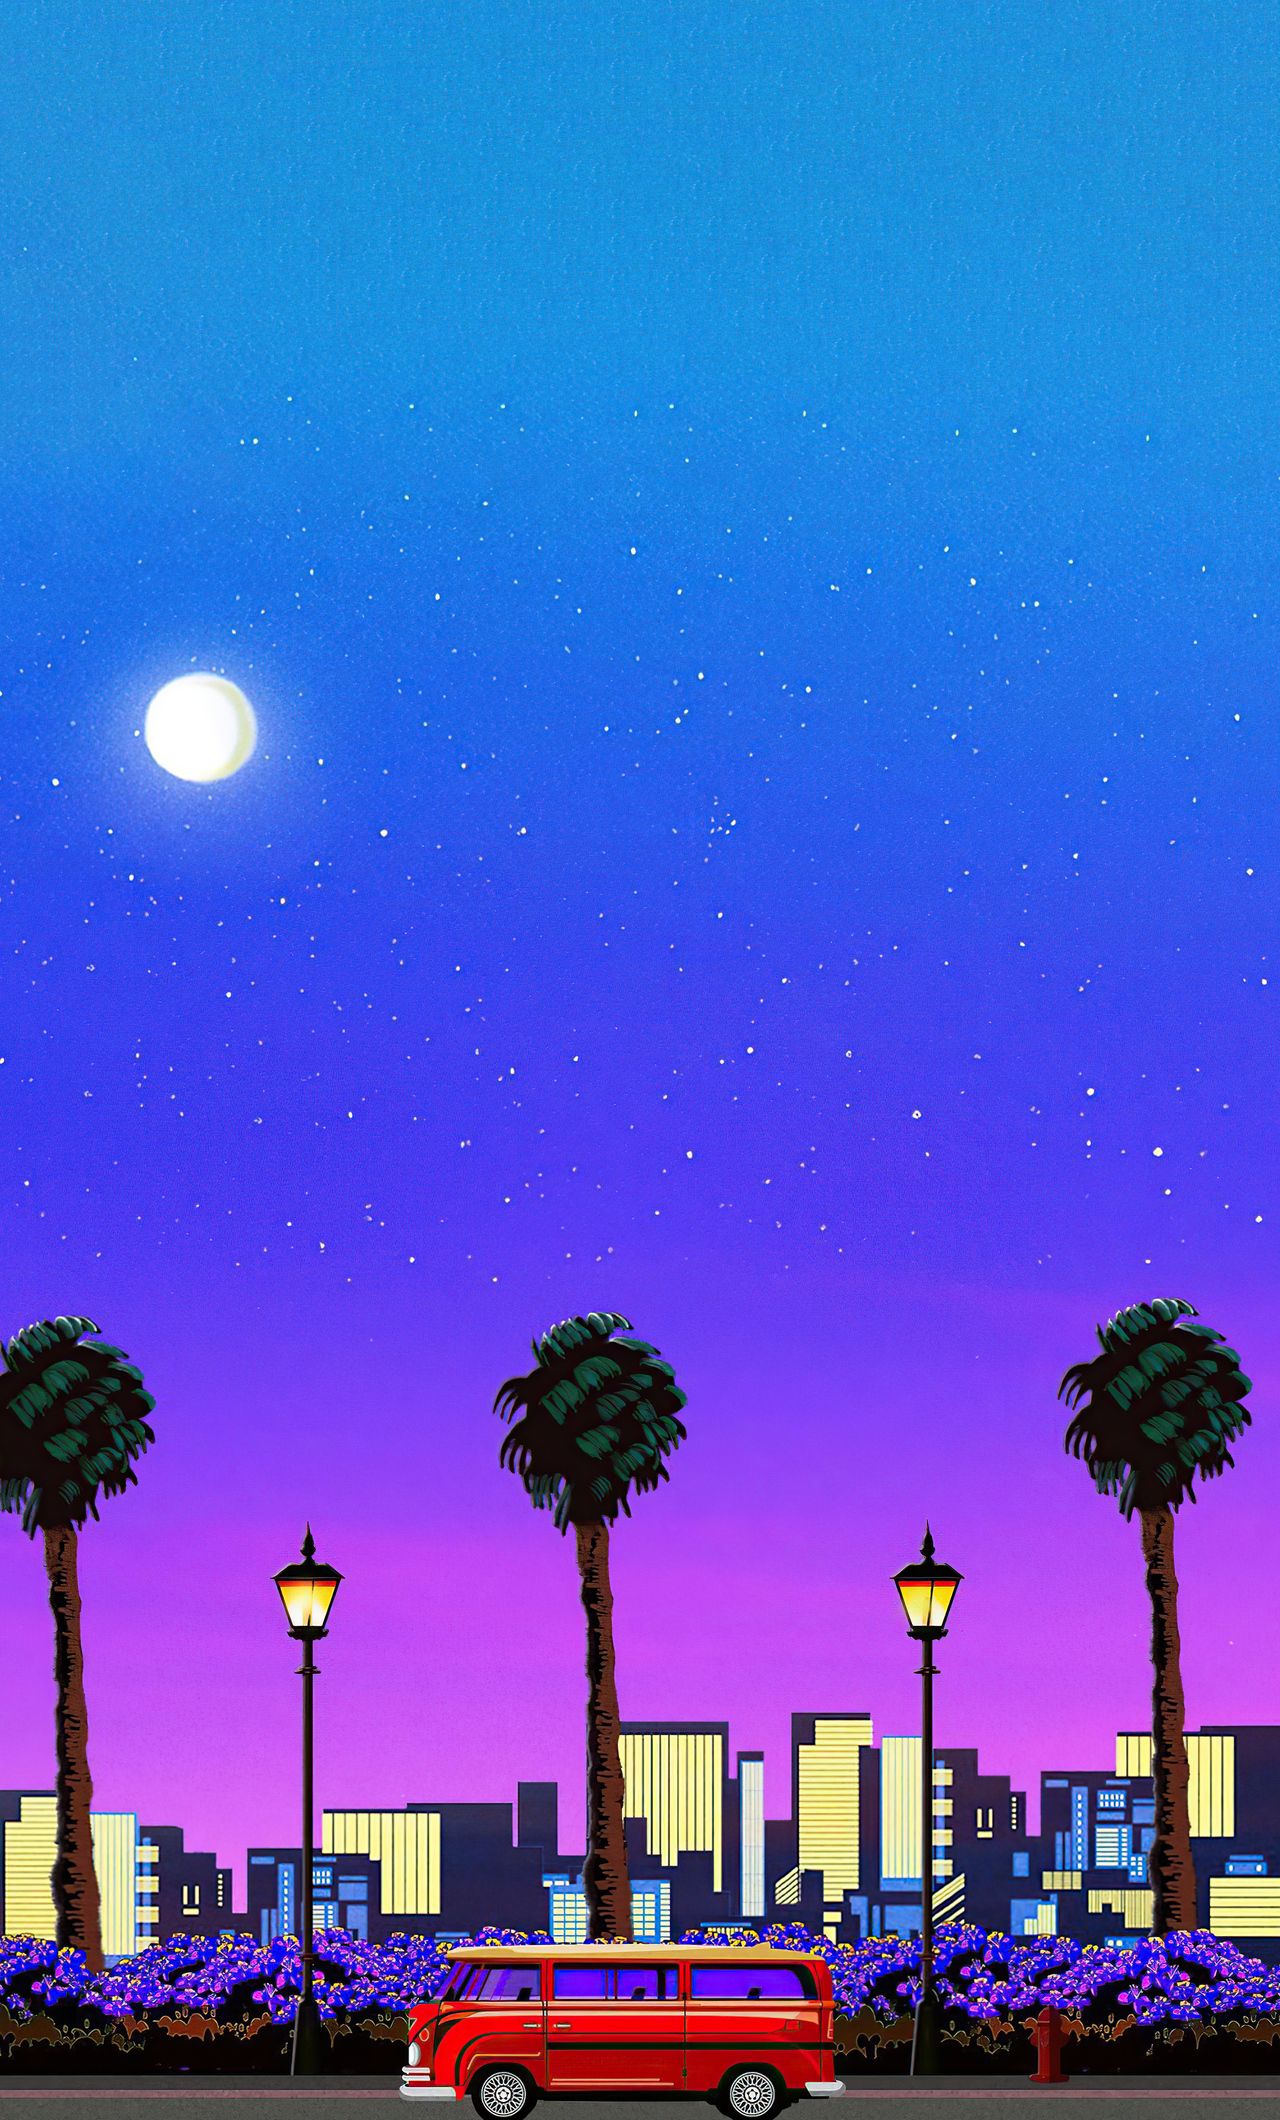  IPhone 6 Hintergrundbild 1280x2120. The Midnight Sky Vaporwave Aesthetic iPhone HD 4k Wallpaper, Image, Background, Photo and Picture